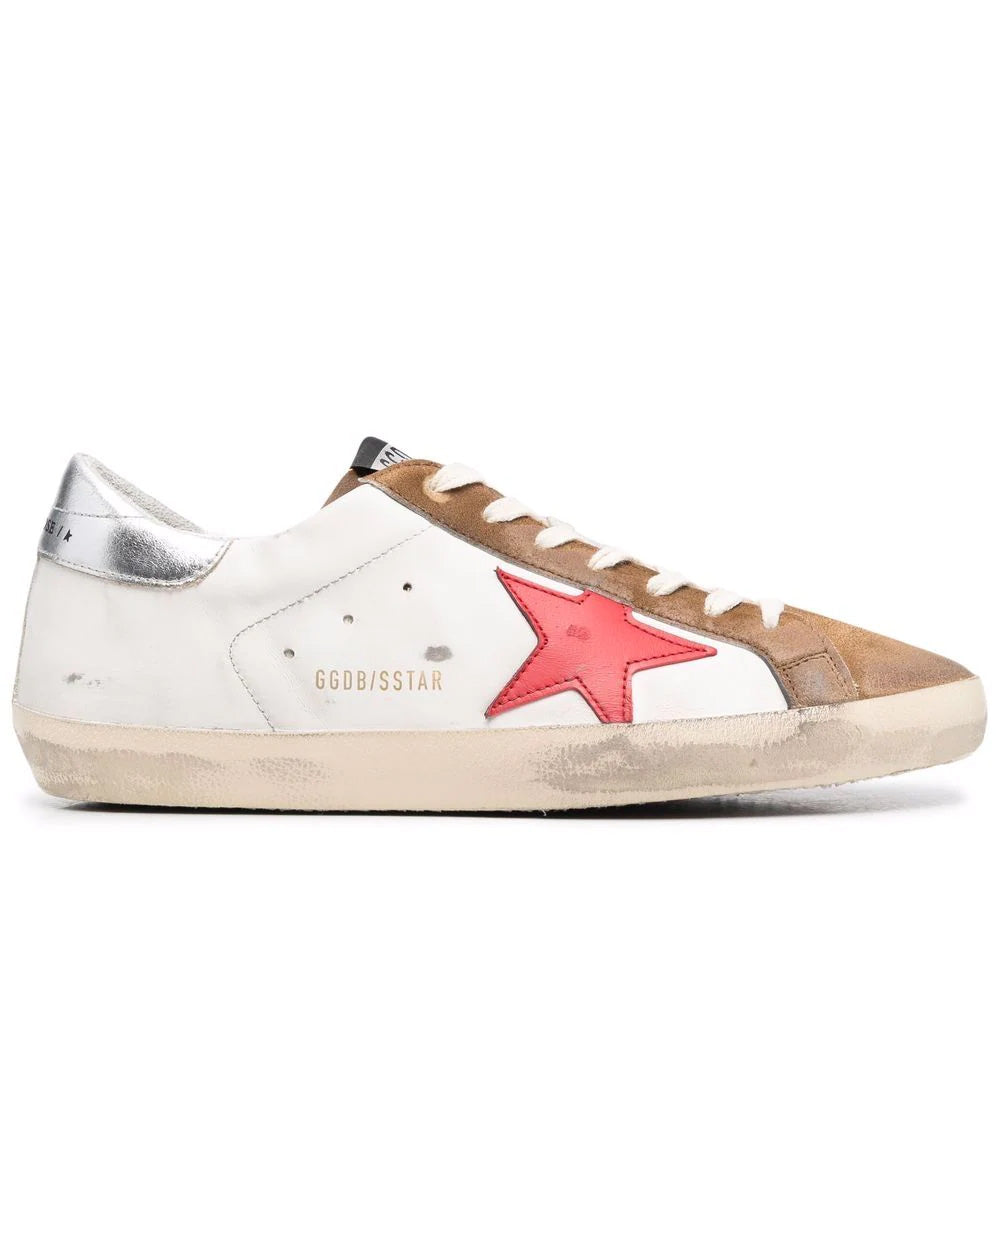 White and Brown Super-Star Classic Sneaker